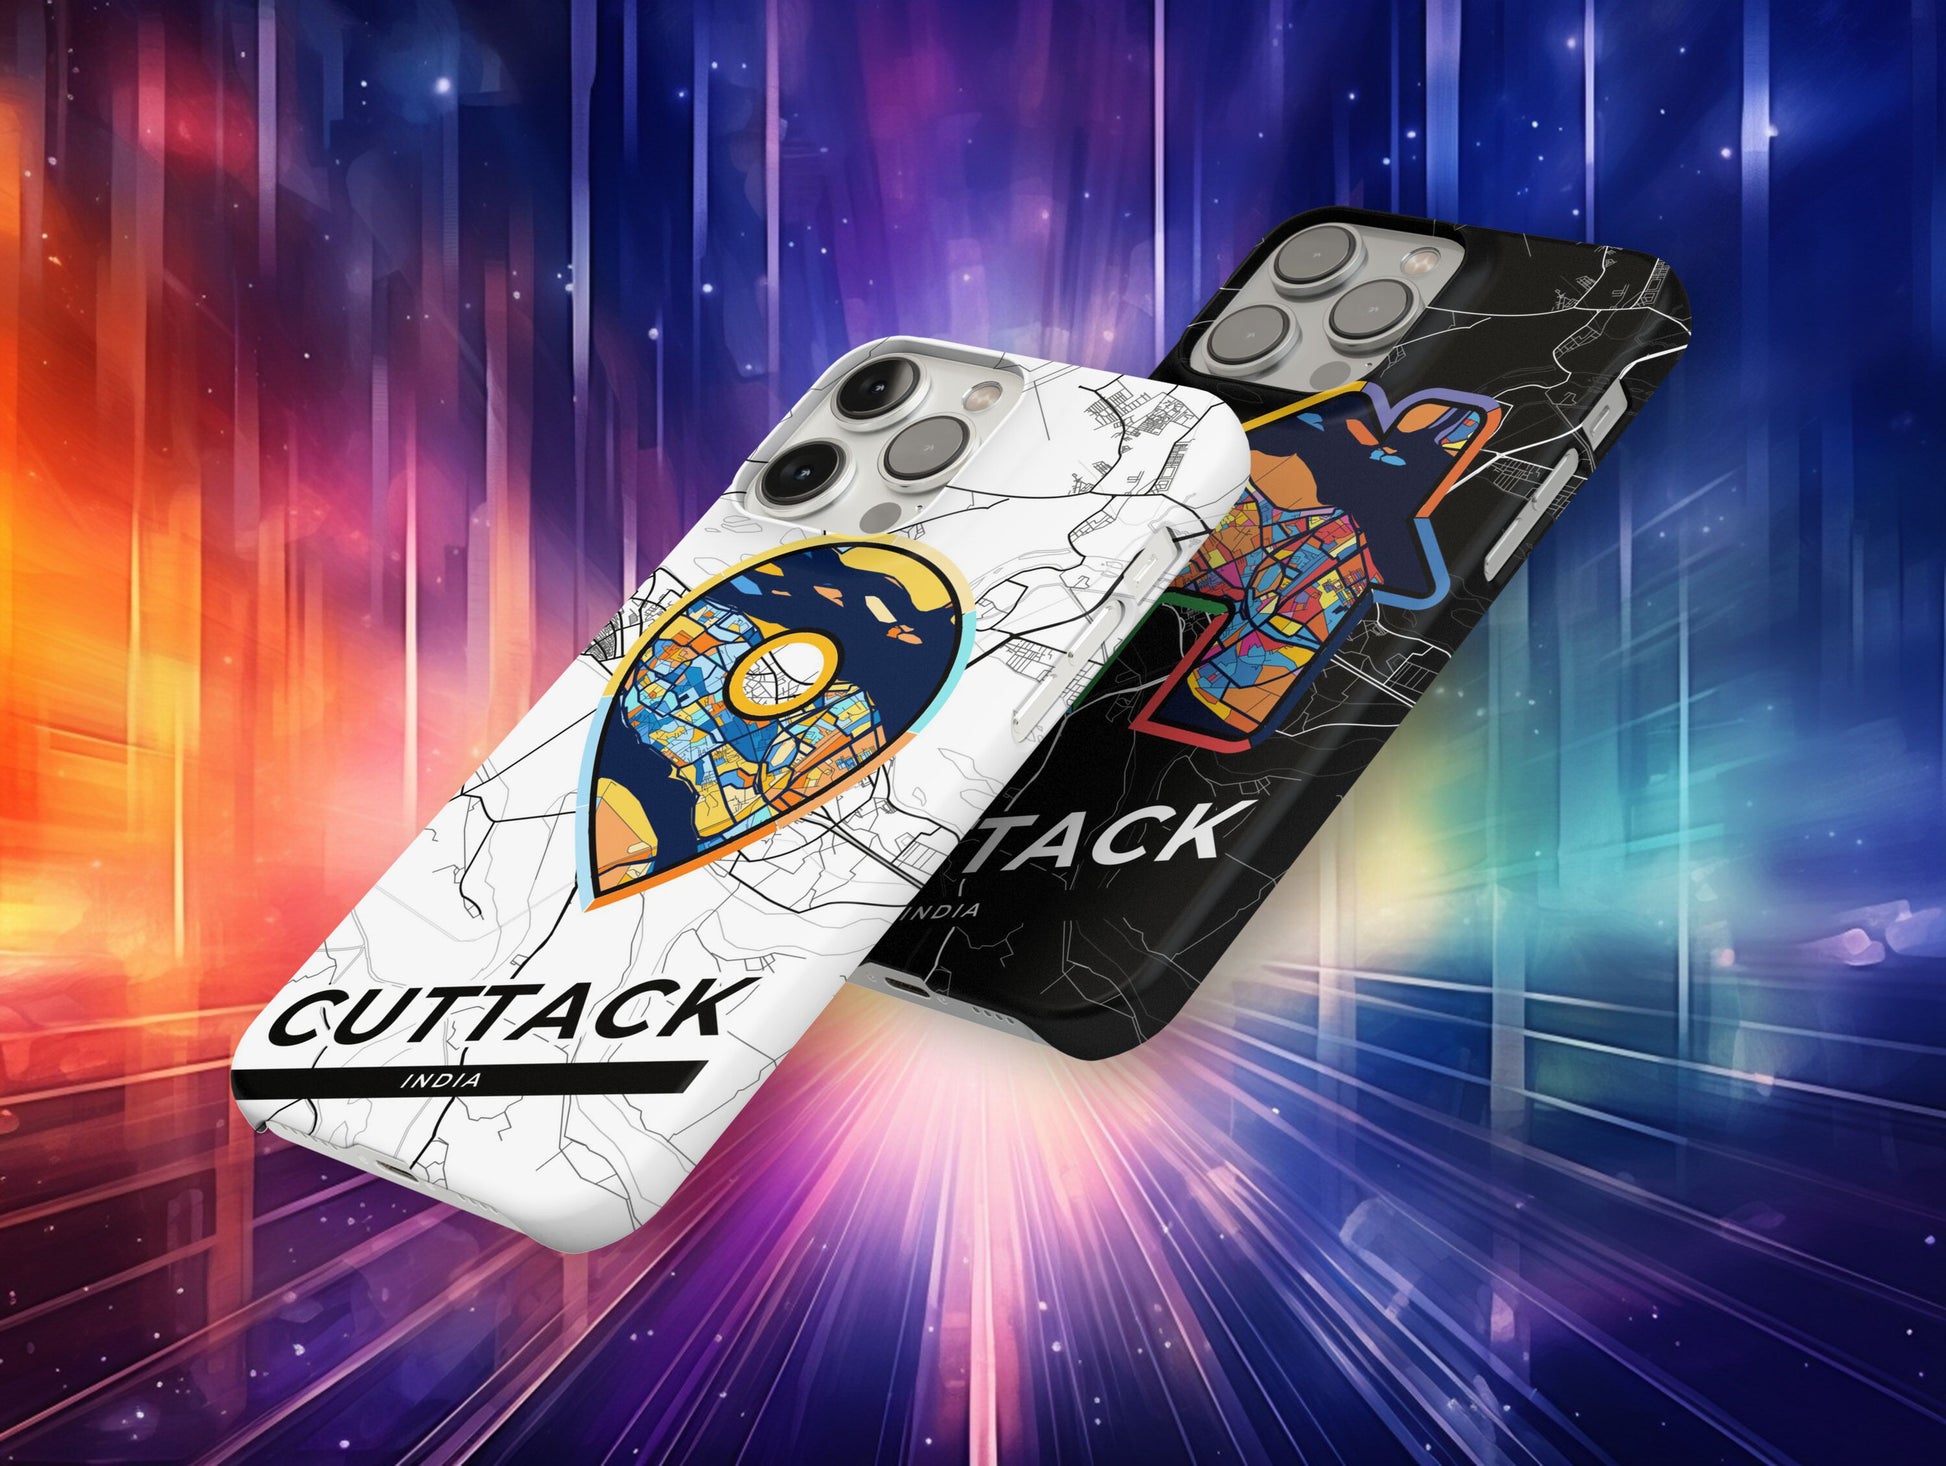 Cuttack India slim phone case with colorful icon. Birthday, wedding or housewarming gift. Couple match cases.